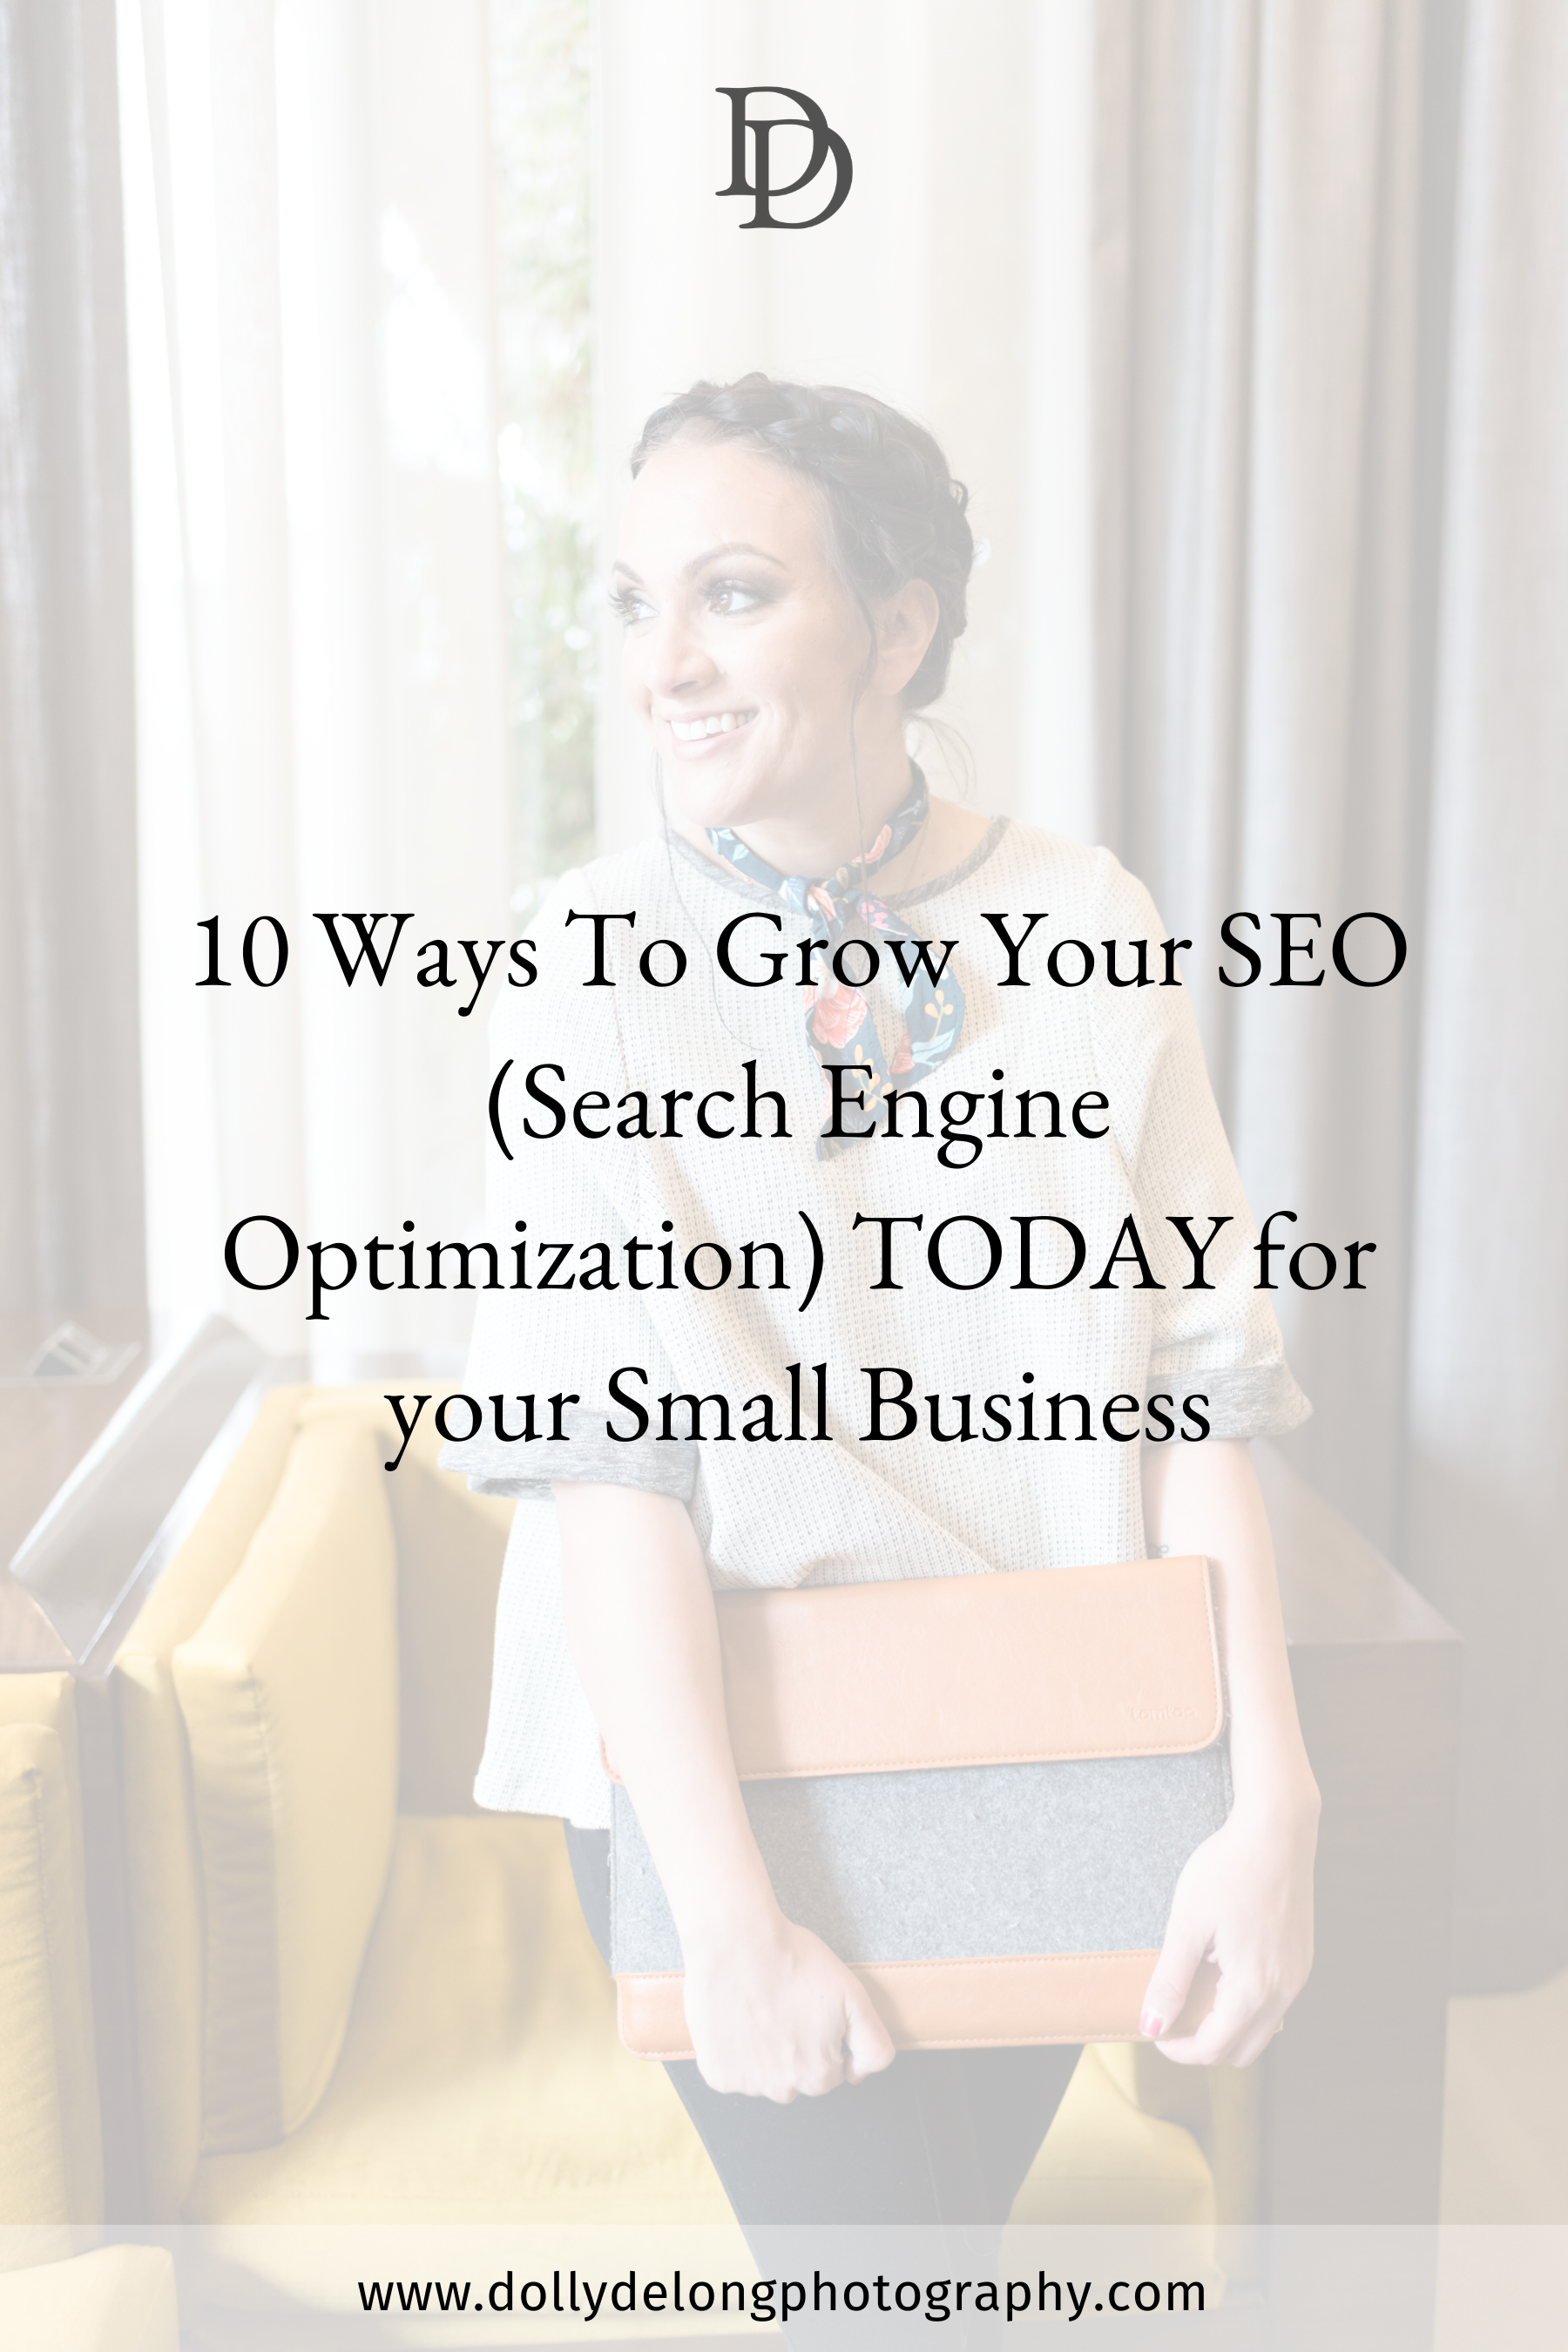 10 ways to grow your SEO Search Engine Optimization by Nashville Branding Photographer Dolly DeLong Photography